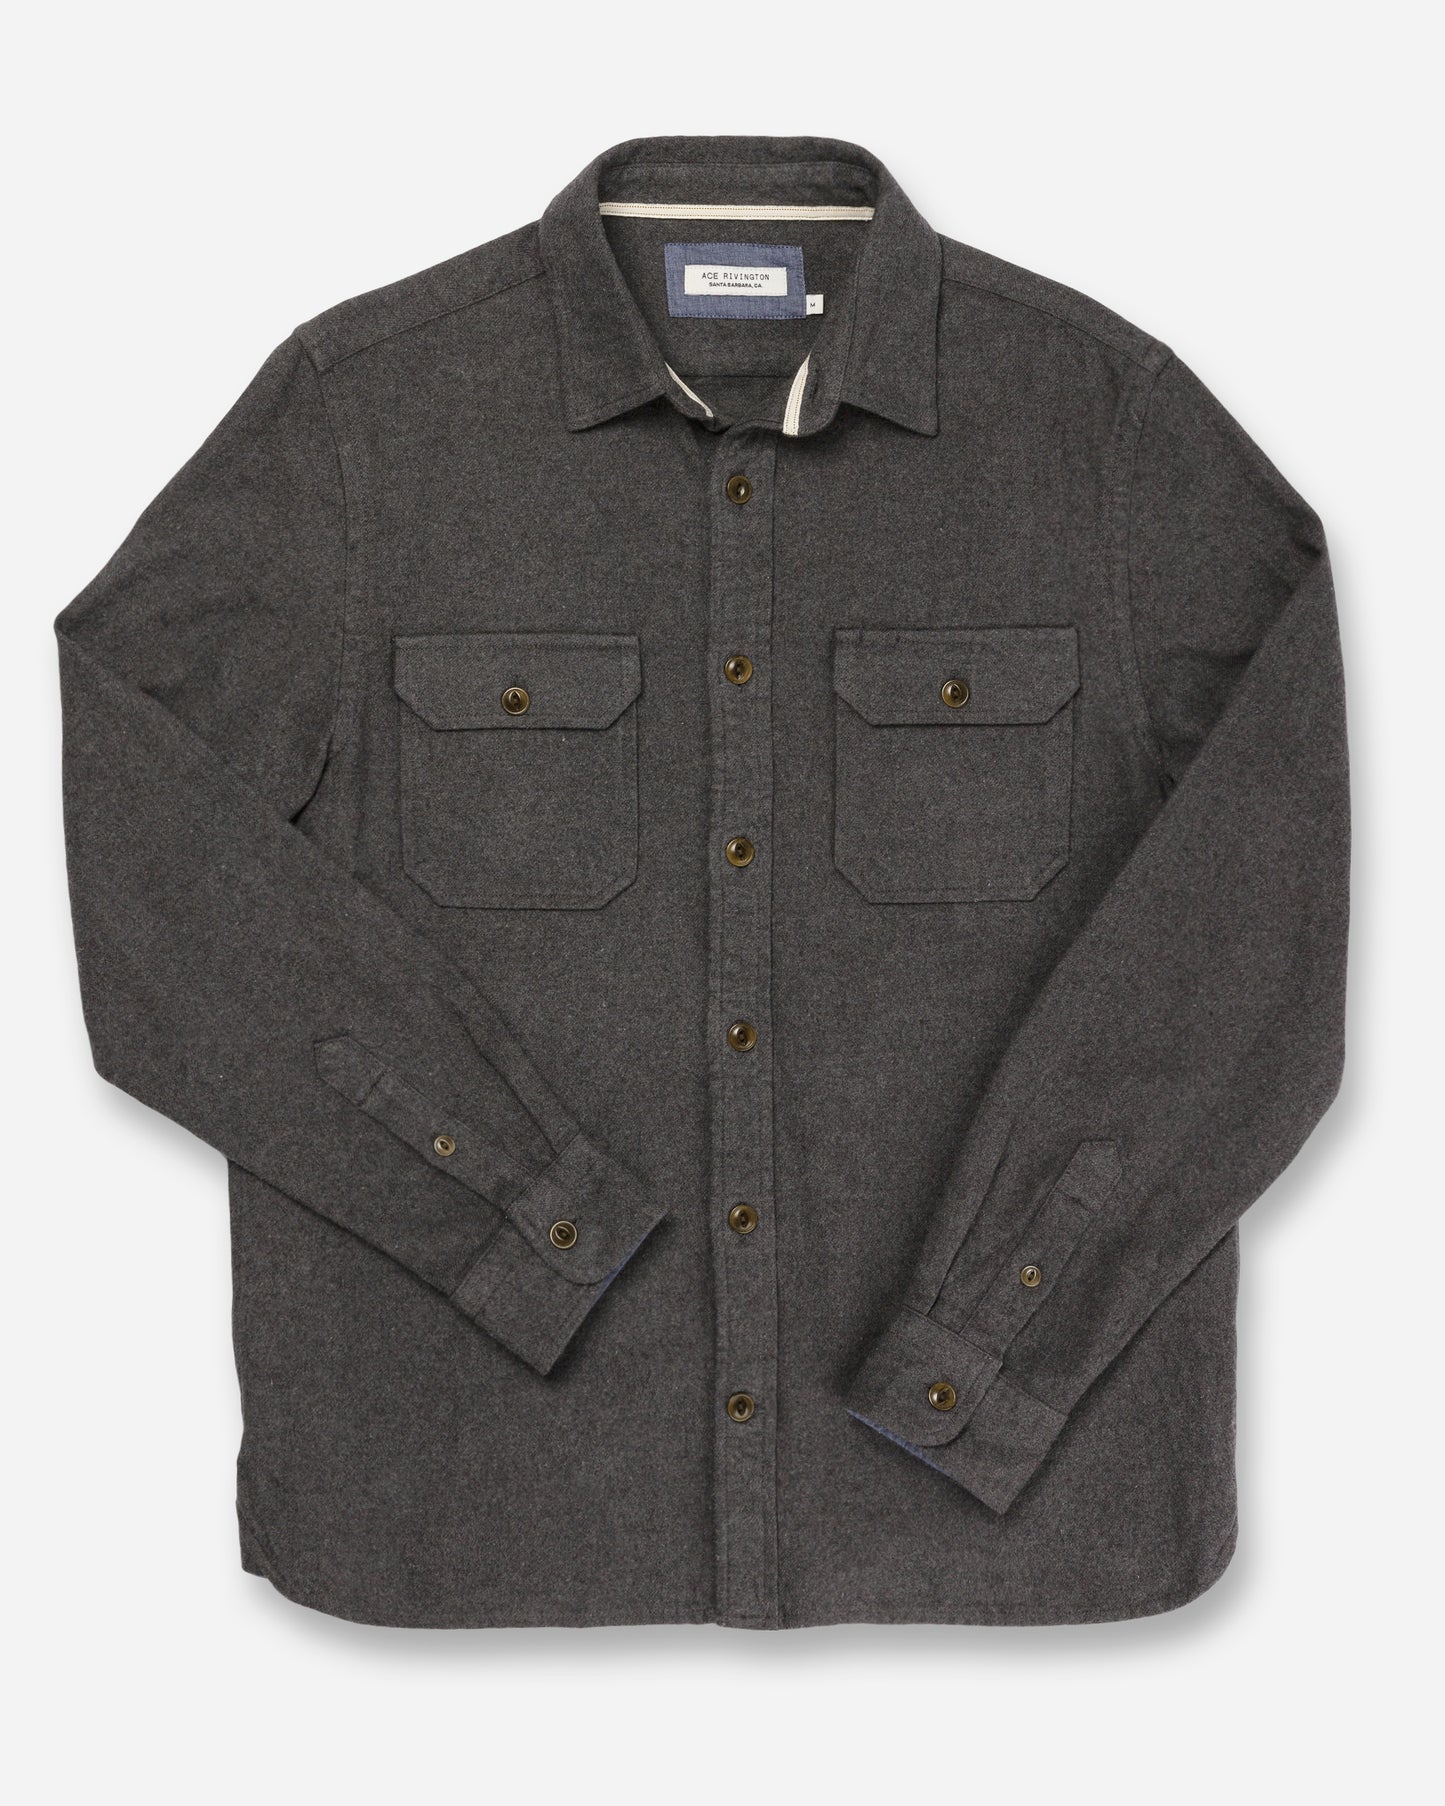 front of men's light grey flannel with brown buttons in standard height option for 5'9" to 6'2" with overlaid arms